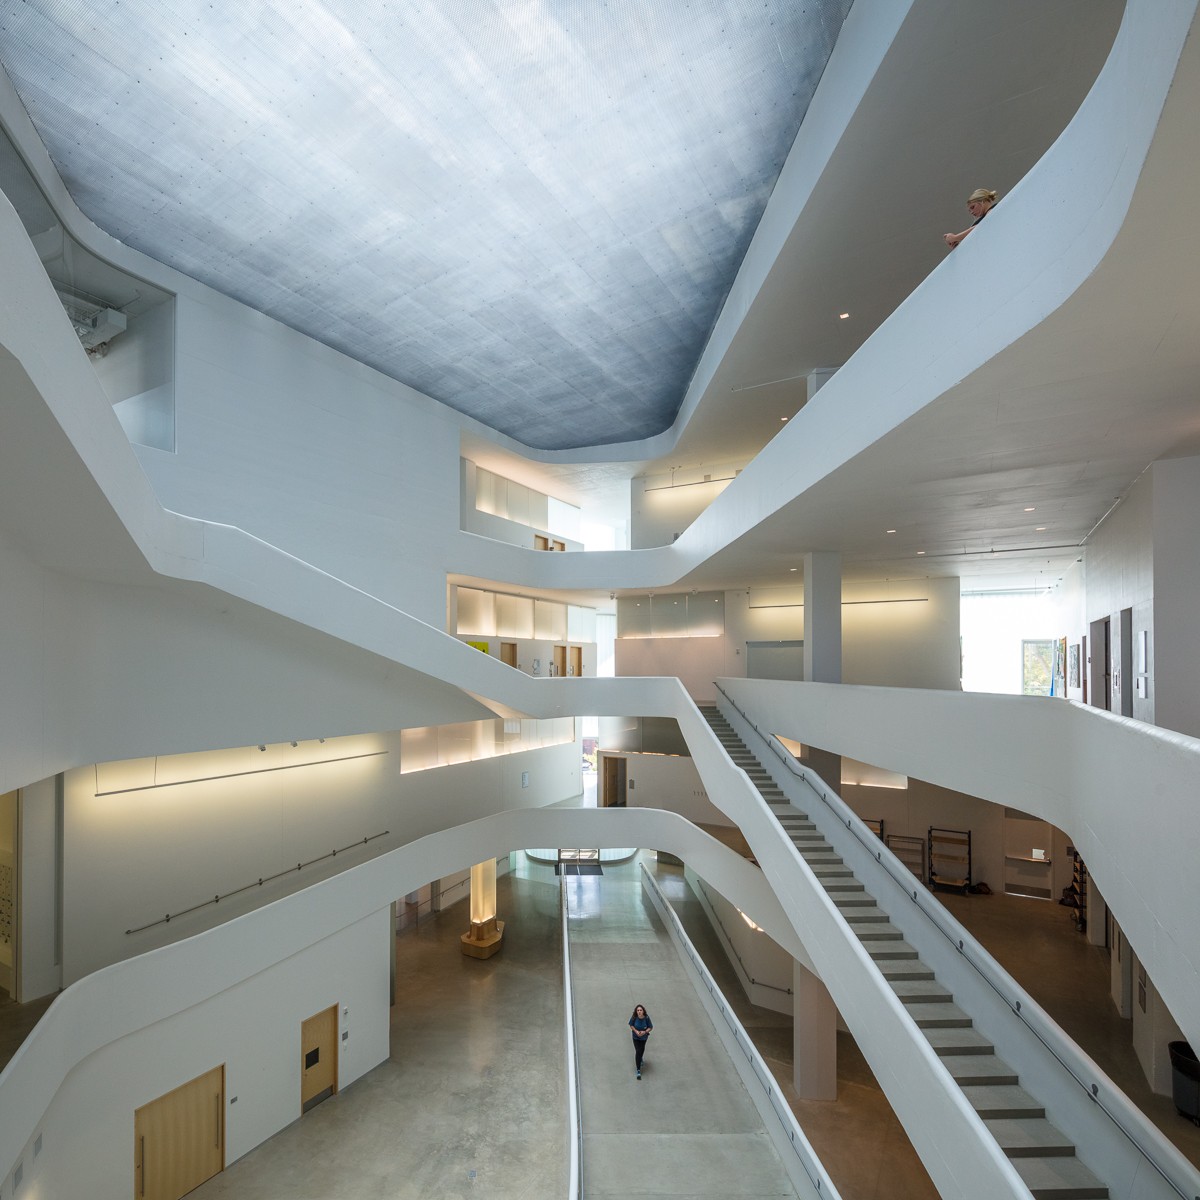 Visual Arts Building at the University of Iowa_ Steven Holl Architects